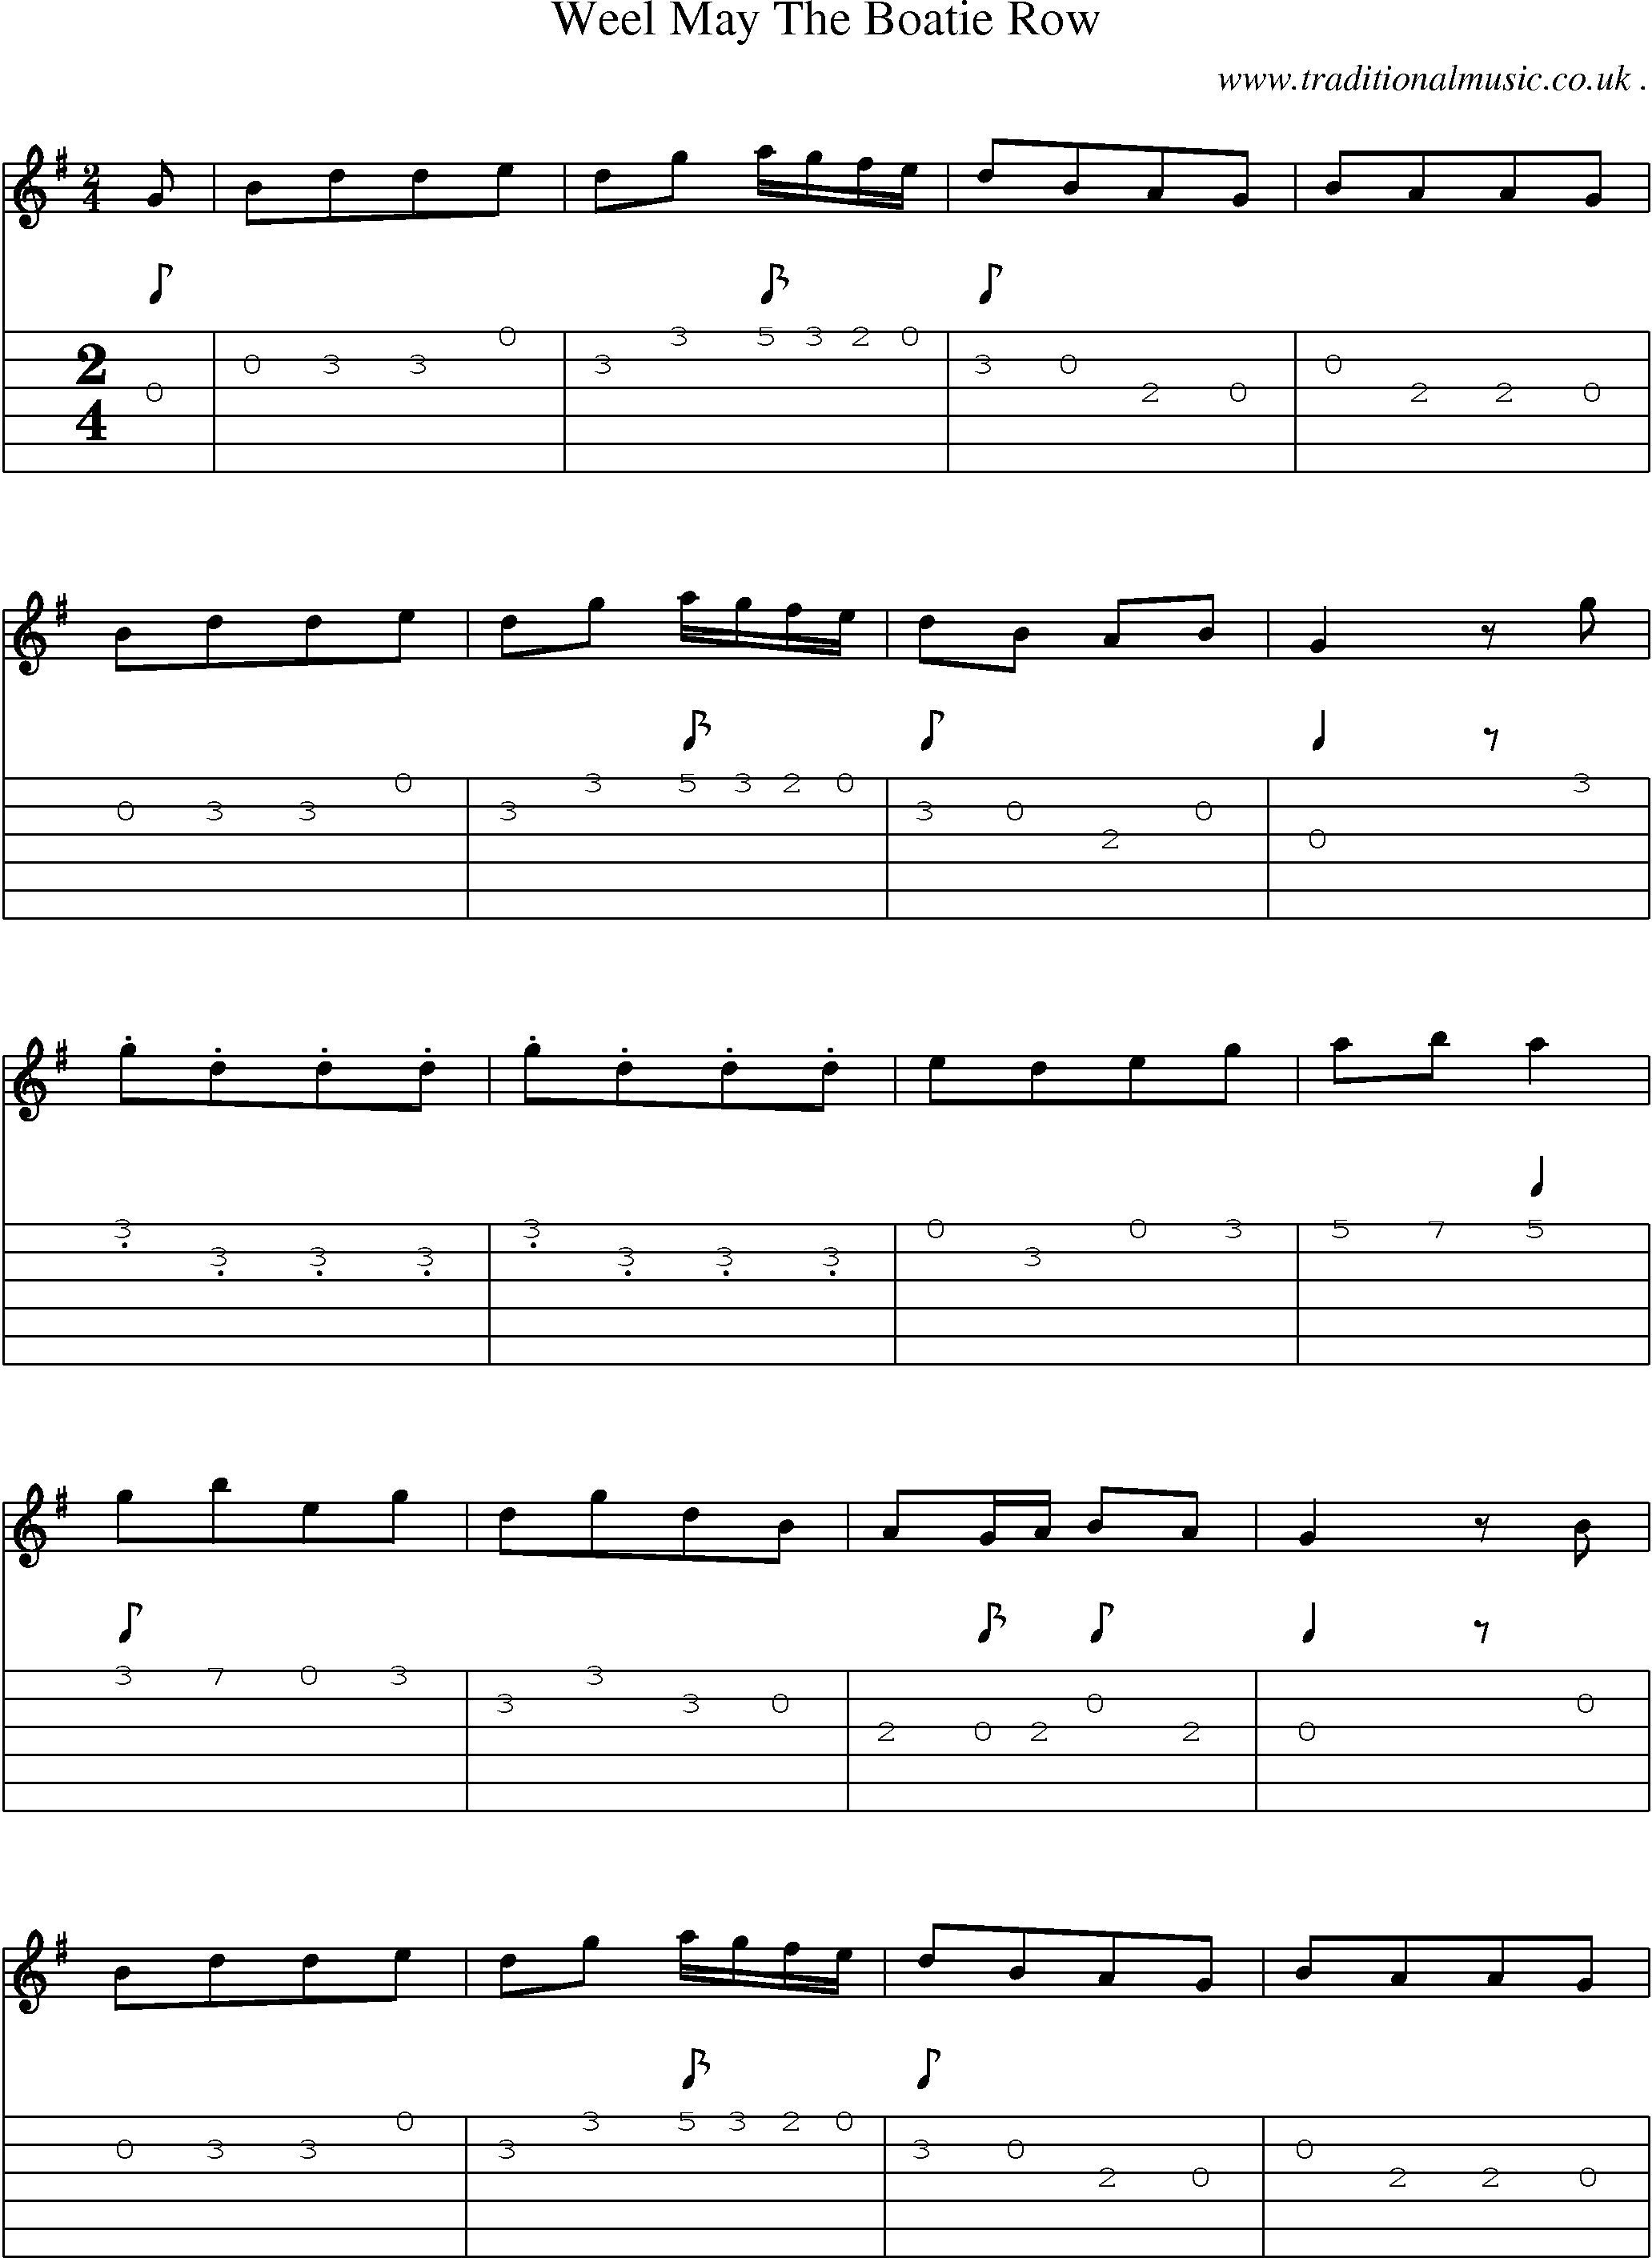 Sheet-Music and Guitar Tabs for Weel May The Boatie Row